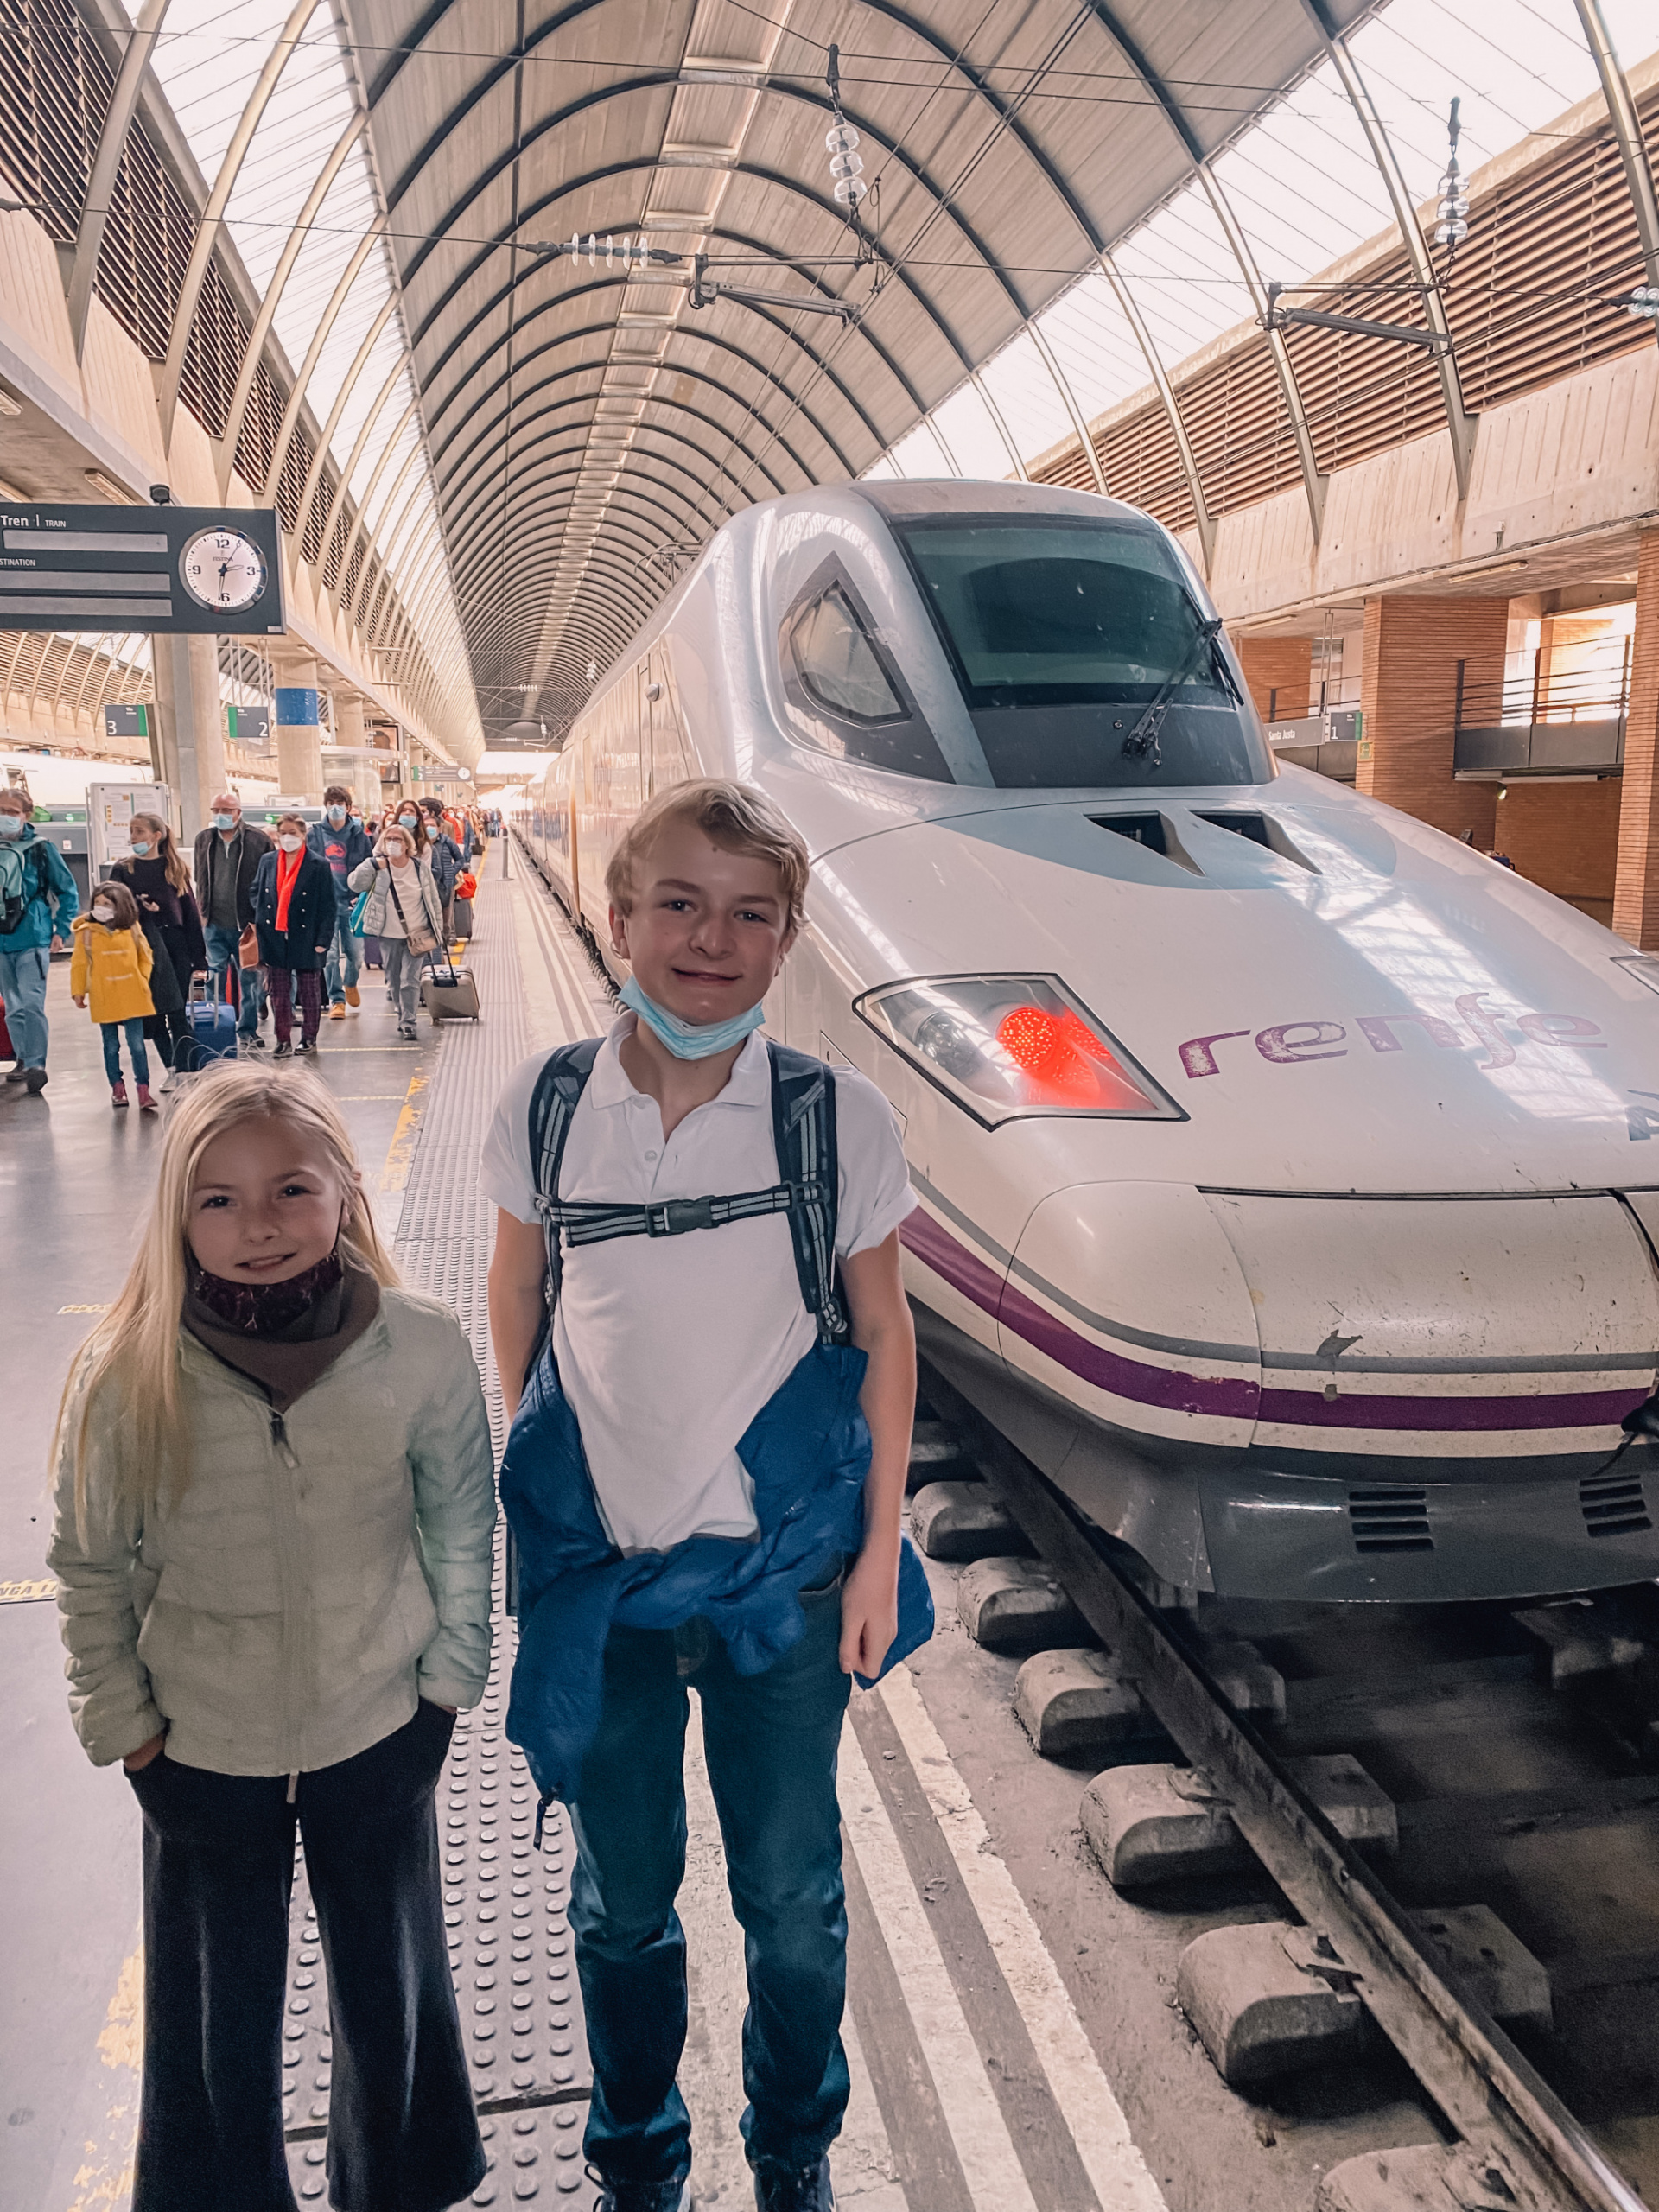 weekend trips from spain, weekend trips from madrid, where to visit near spain, best weekend trips from madrid, erin busbee, sevilla, spain, high speed train madrid to sevilla